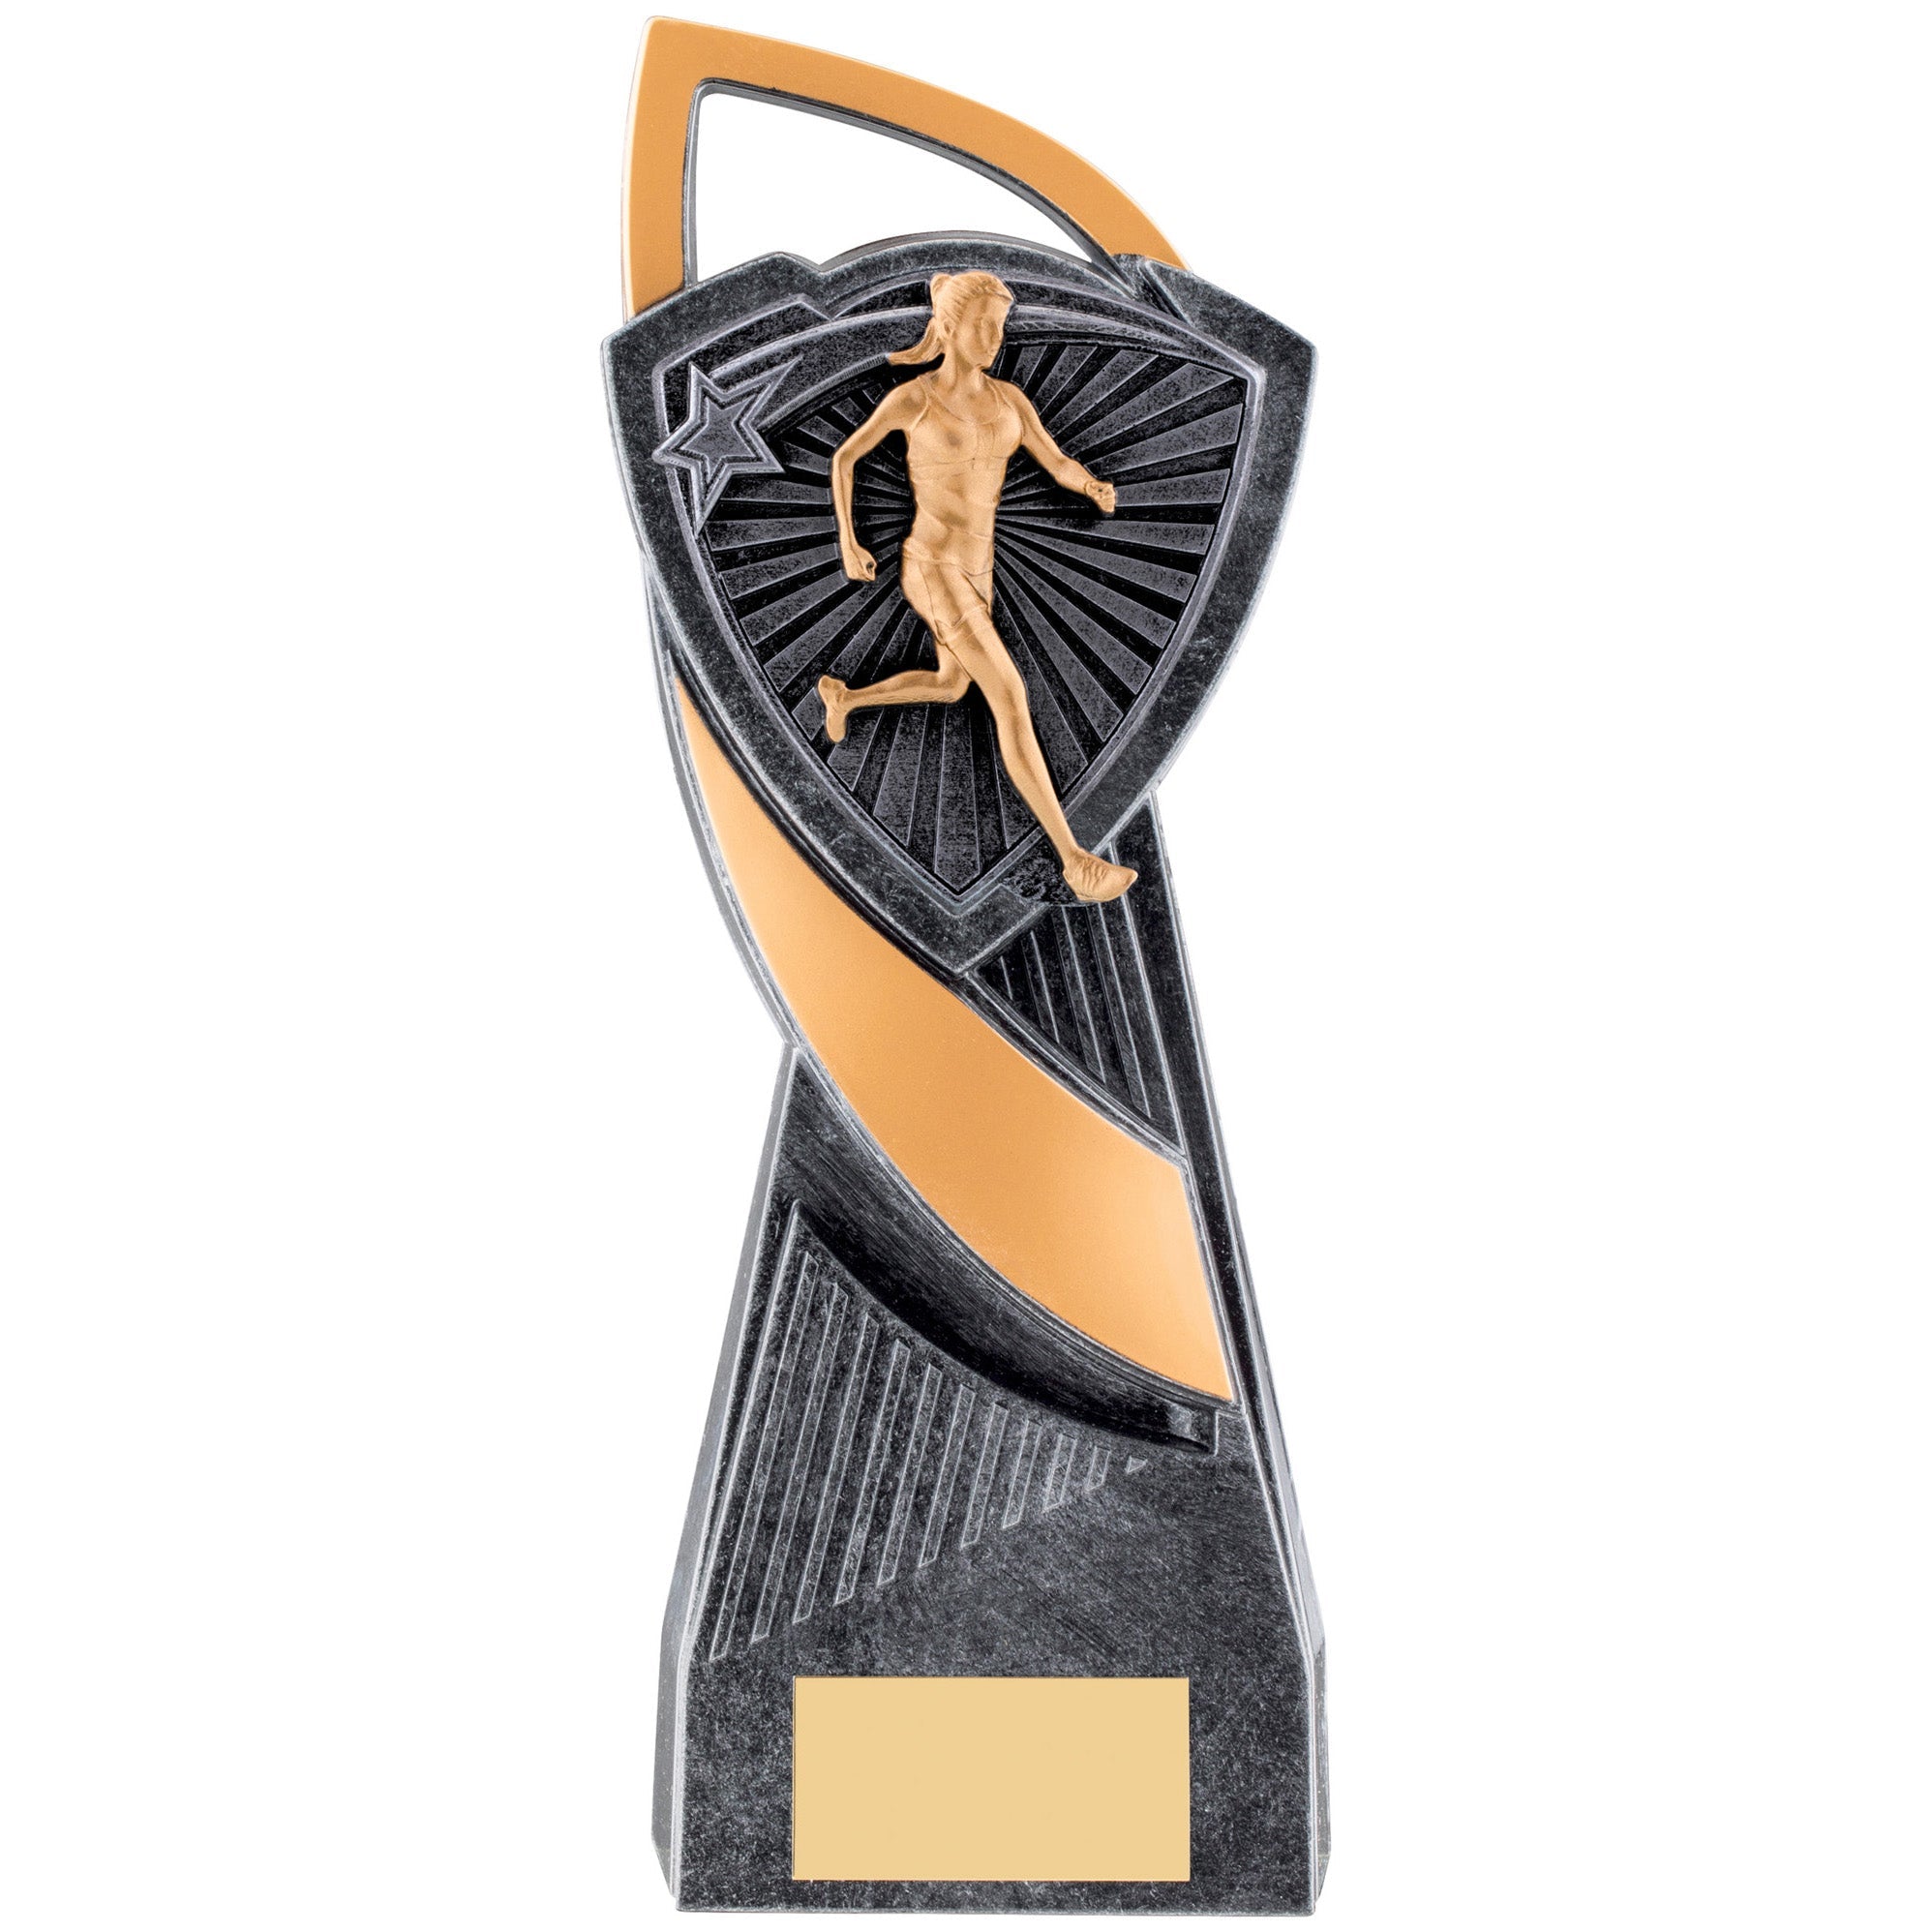 Utopia Female Running Trophy (Gold/Silver)